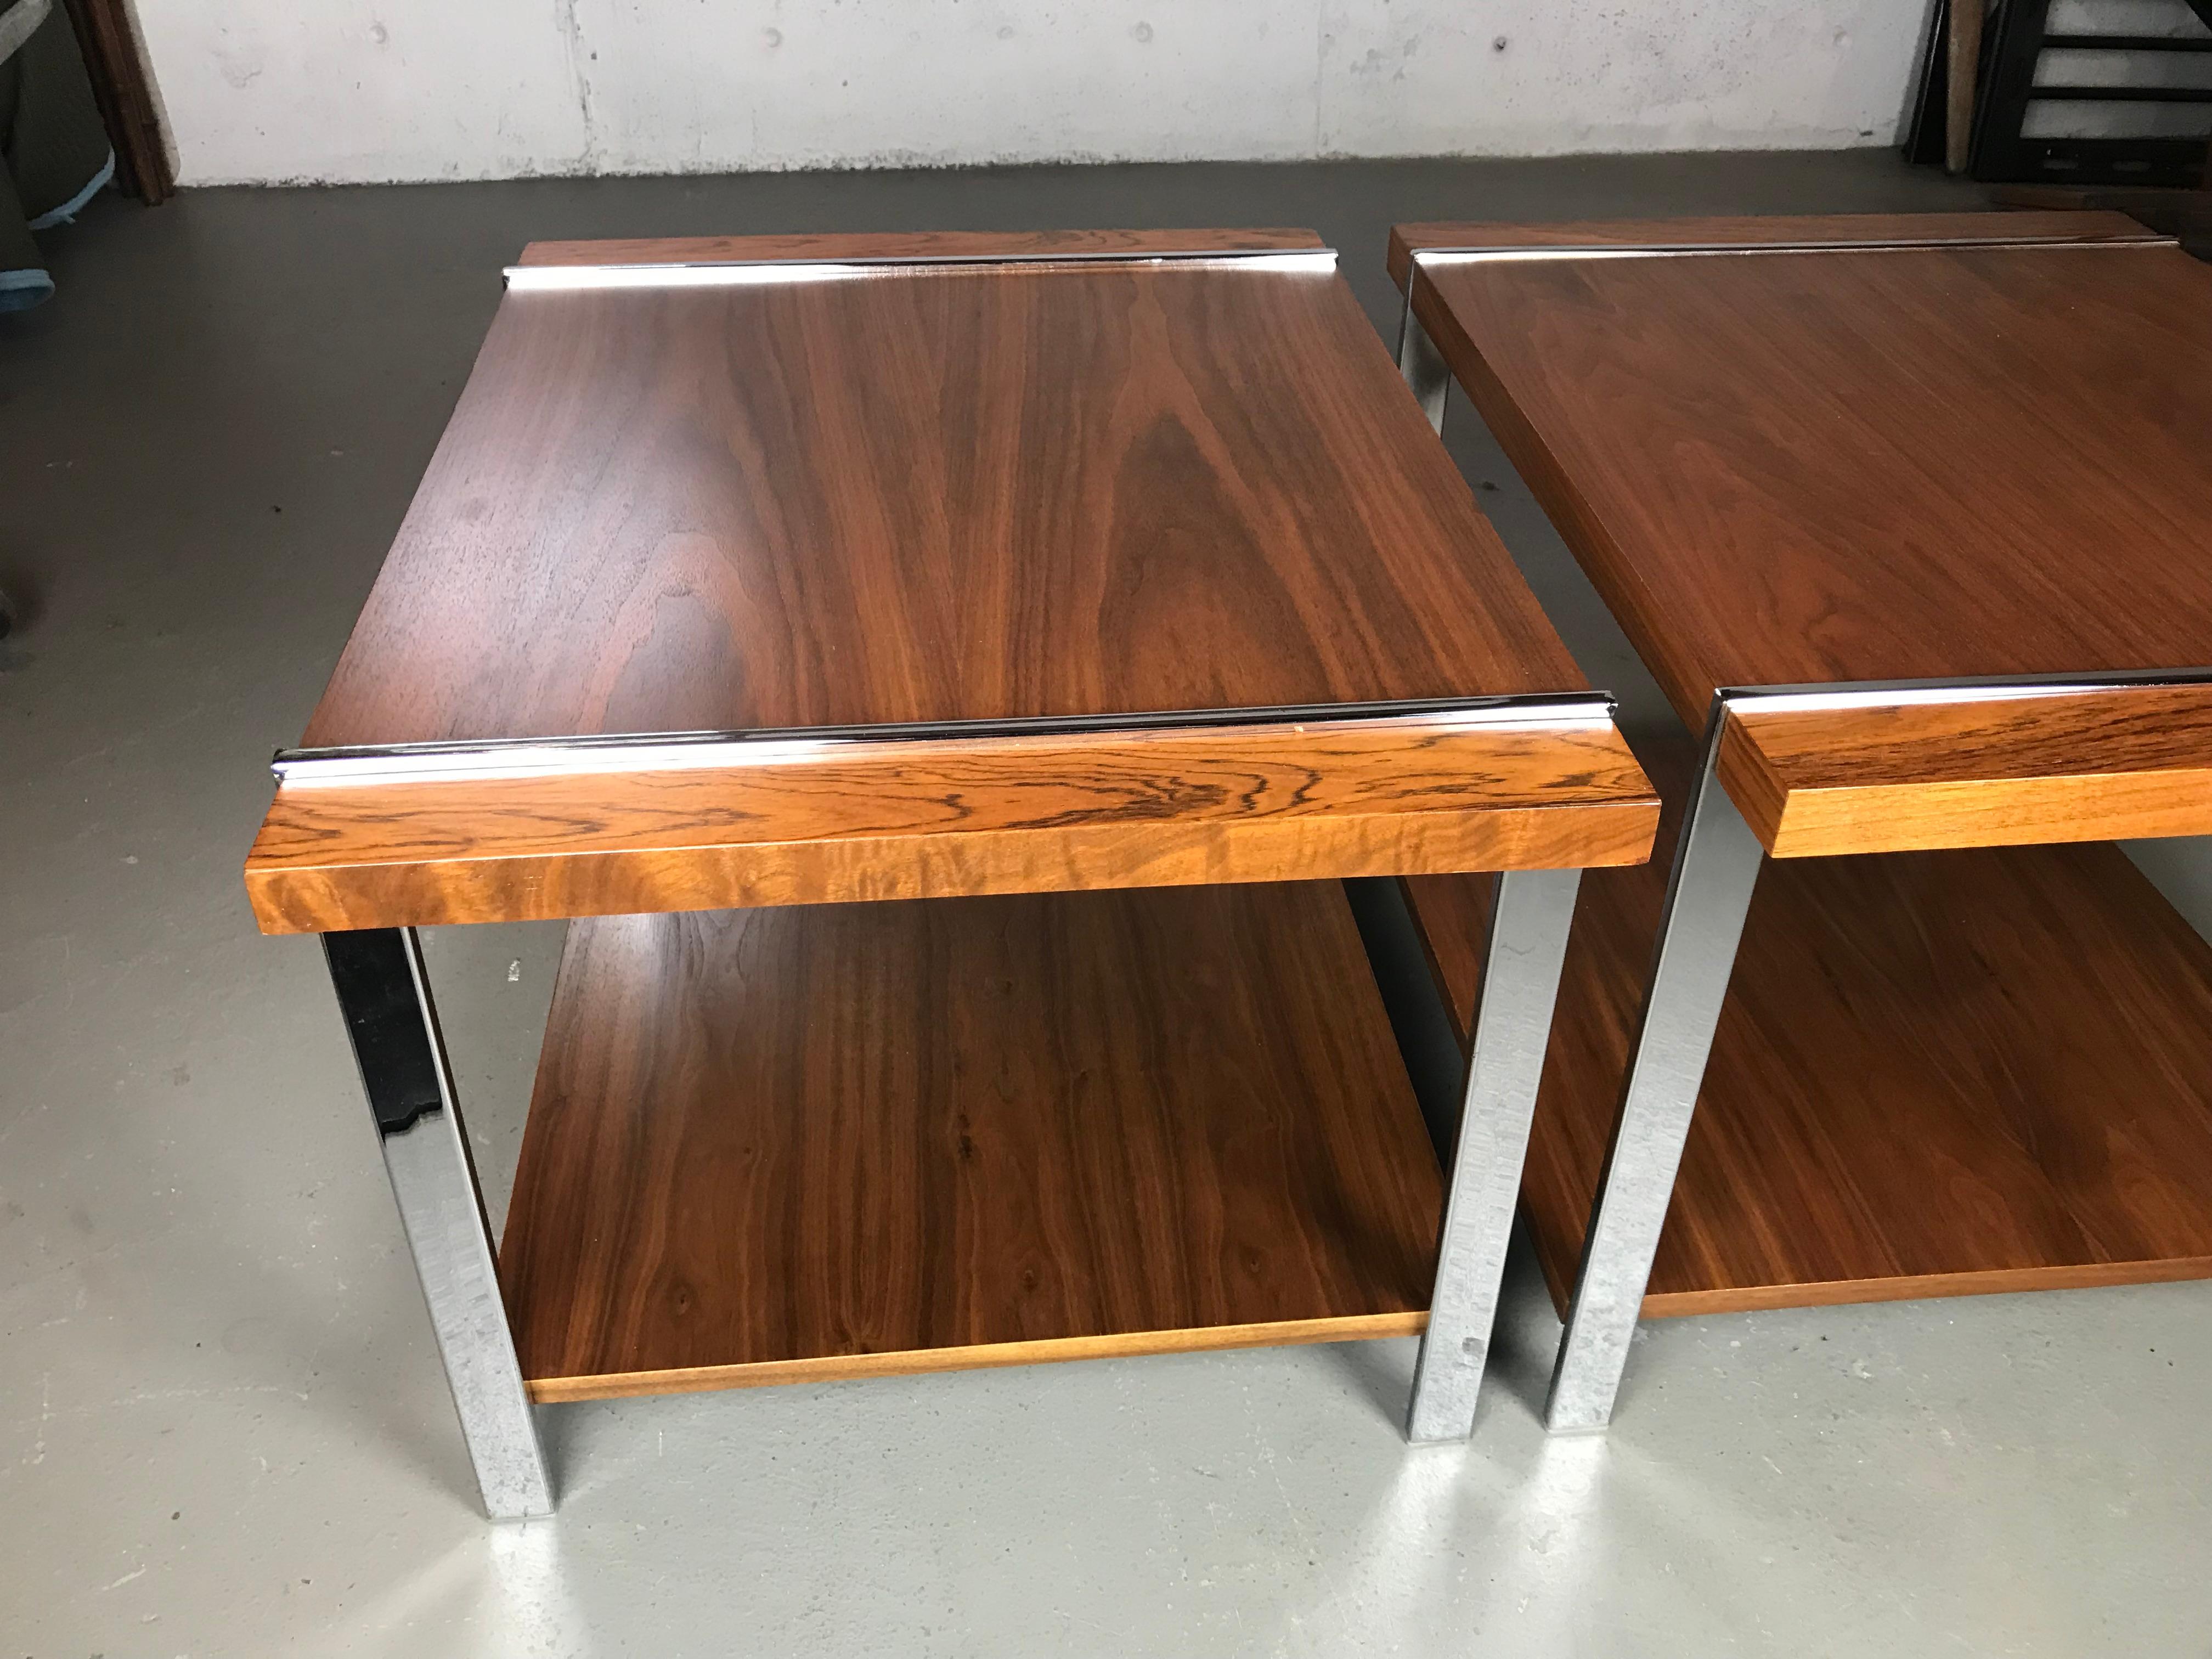 American Architectural Mid-Century Modern Walnut Rosewood & Chrome End Tables by Lane 